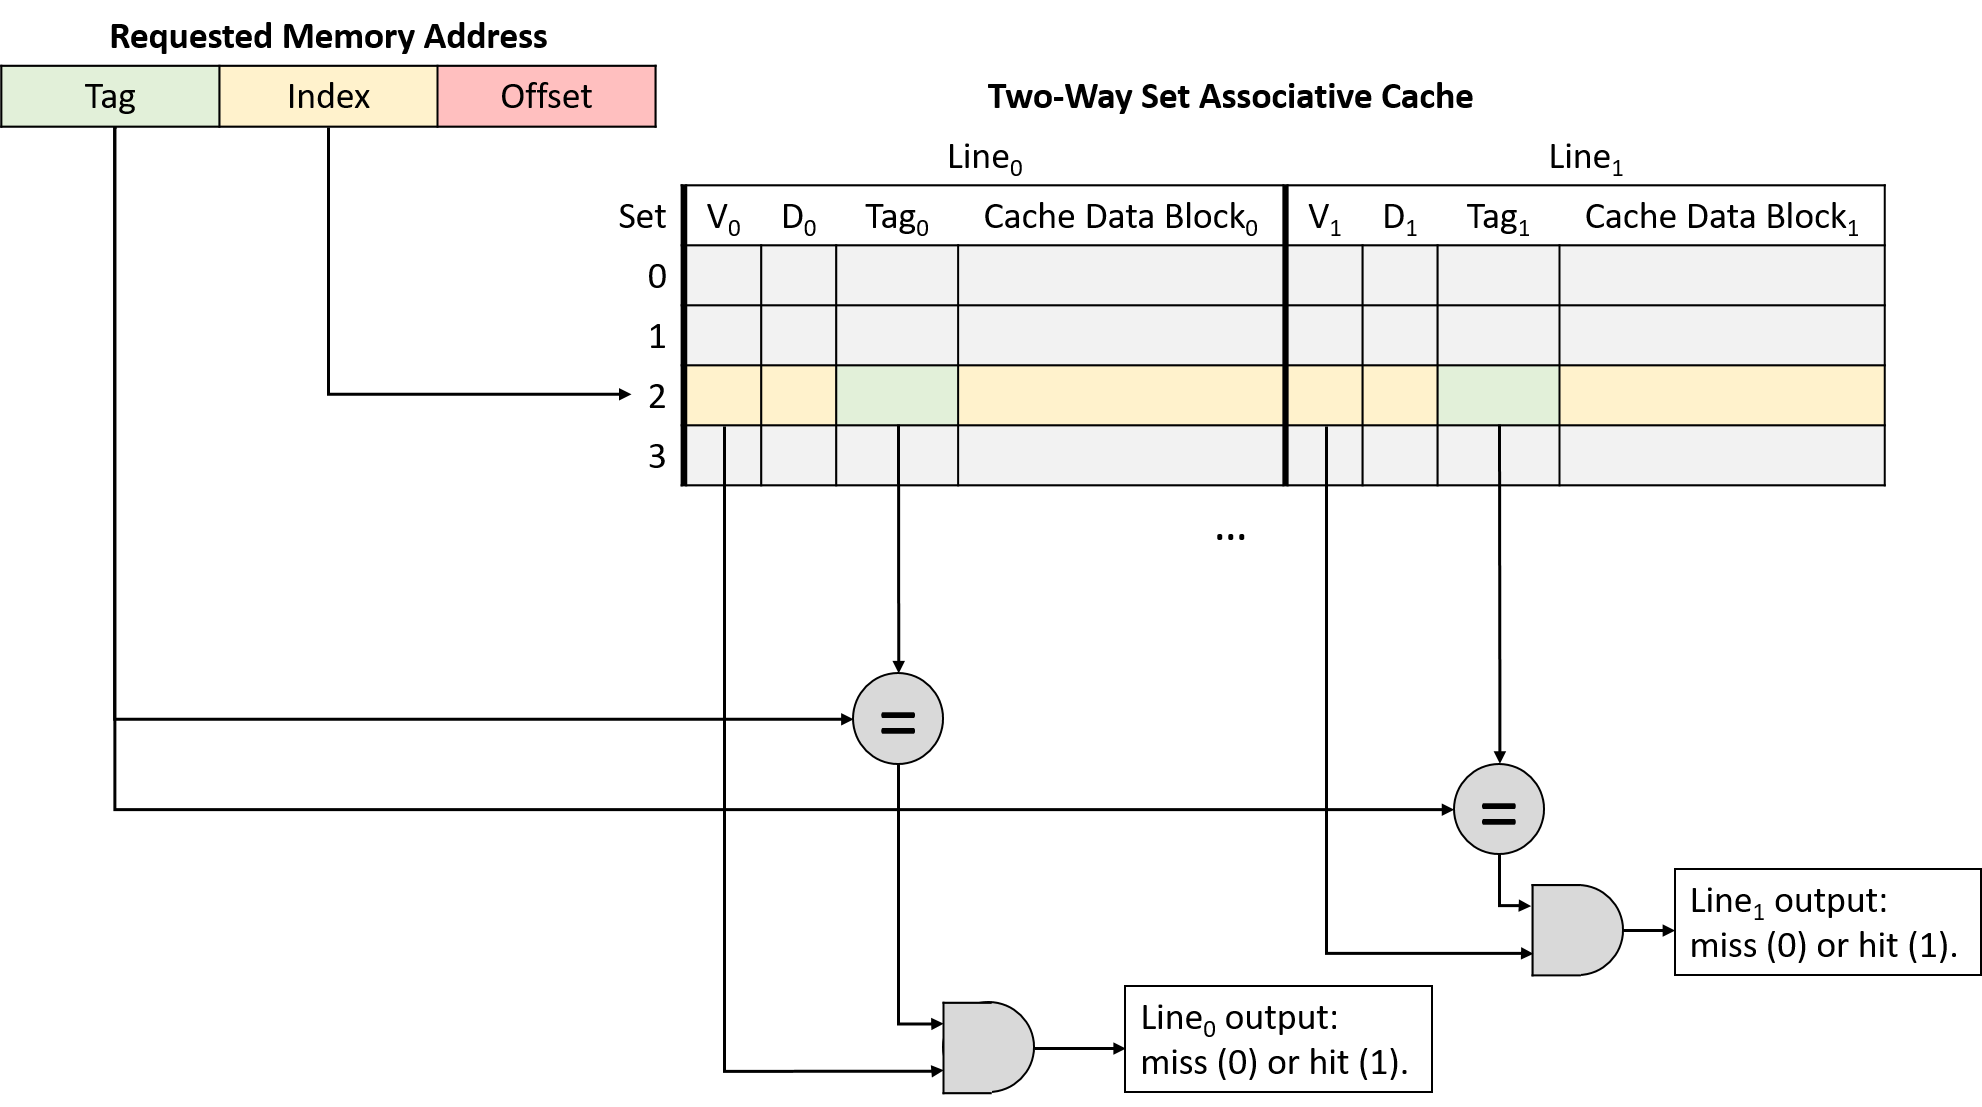 The cache sends the address’s tag to two comparator circuits in parallel to check whether it matches the tag stored in either cache line of the set.